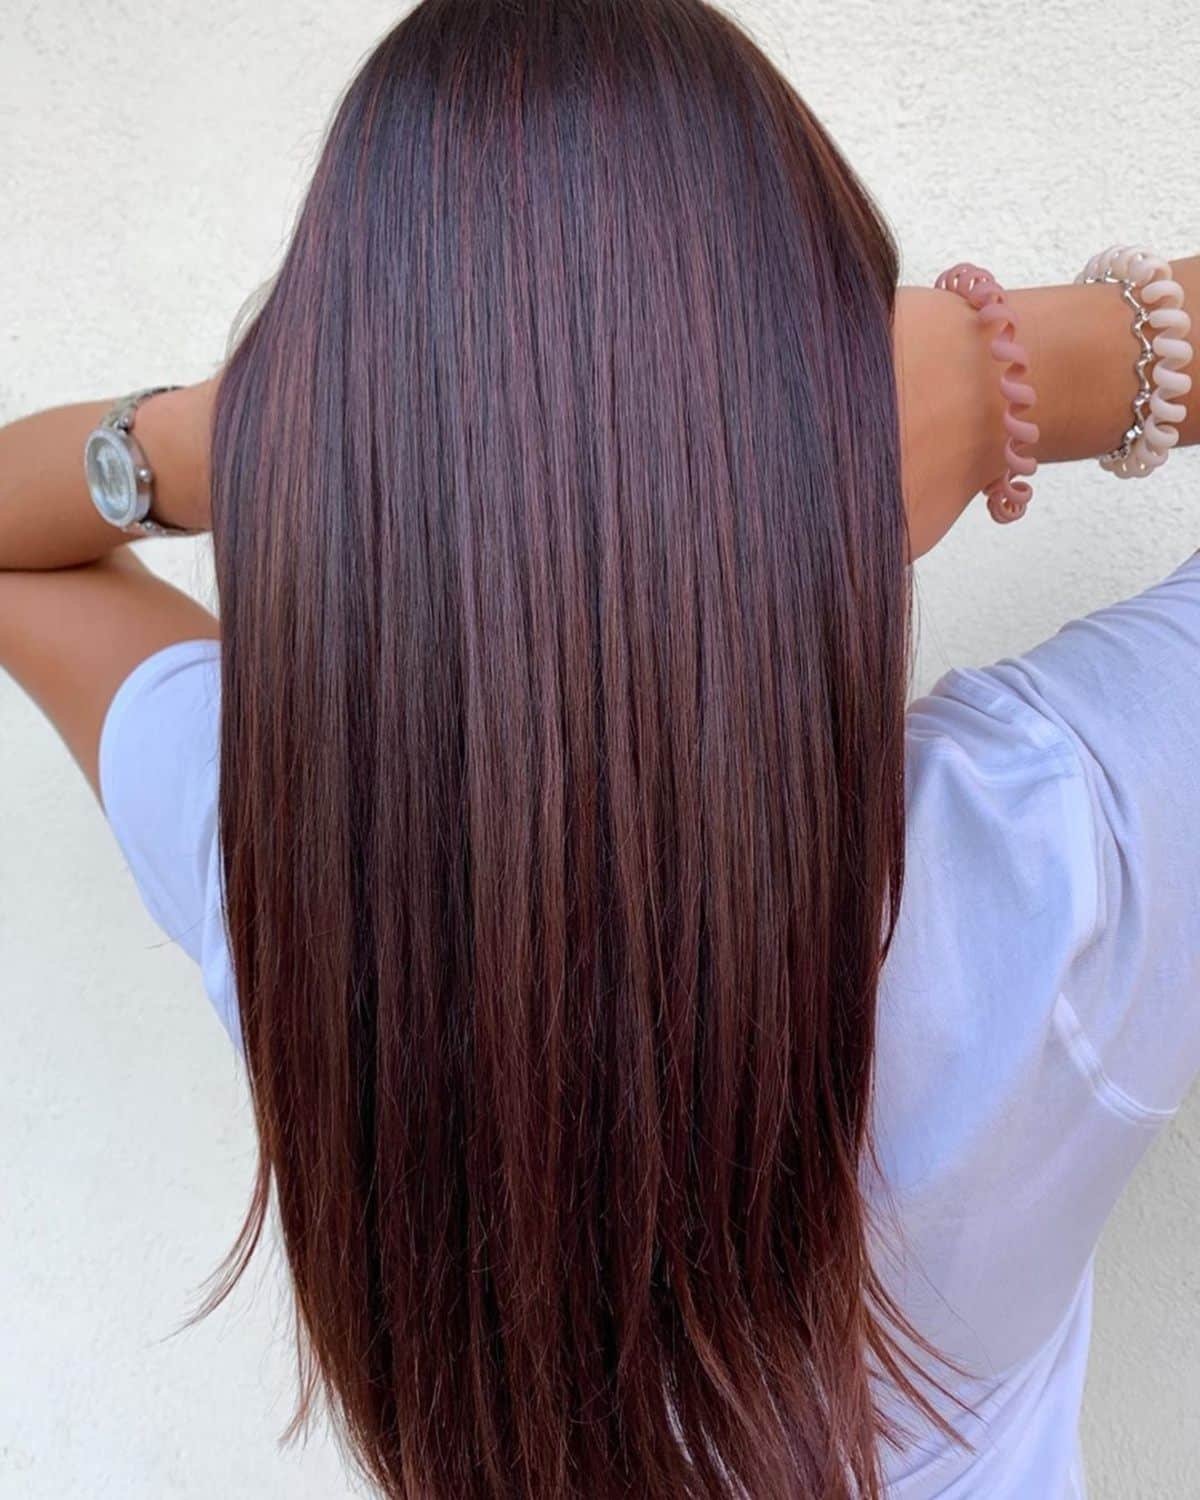 Long Dark Cherry Red Hair With Black Highlights